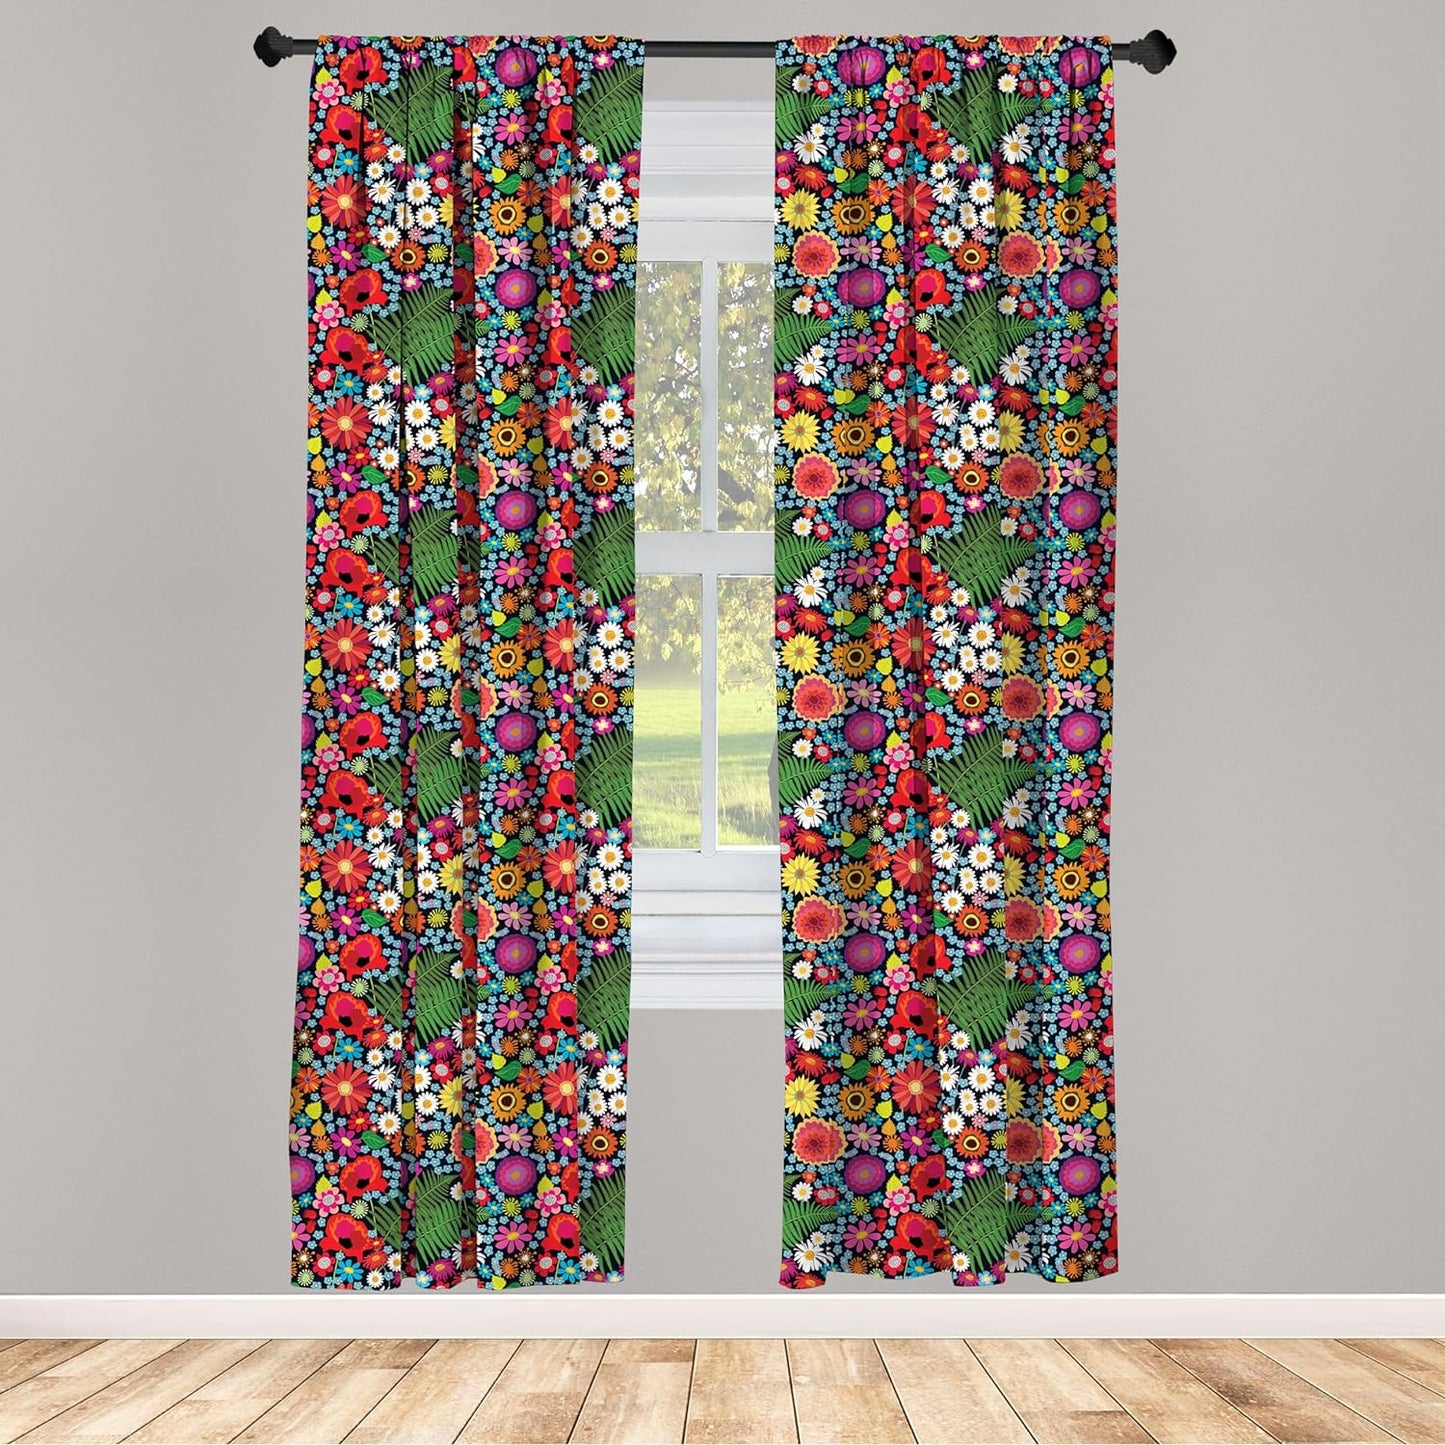 Ambesonne Floral 2 Panel Curtain Set, Colorful Spring Wildflowers Demonstration with Asters Chamomiles and Fern Leaves, Window Treatment Living Room Bedroom Decor, Pair of - 28" X 63", Green Magenta  Ambesonne   